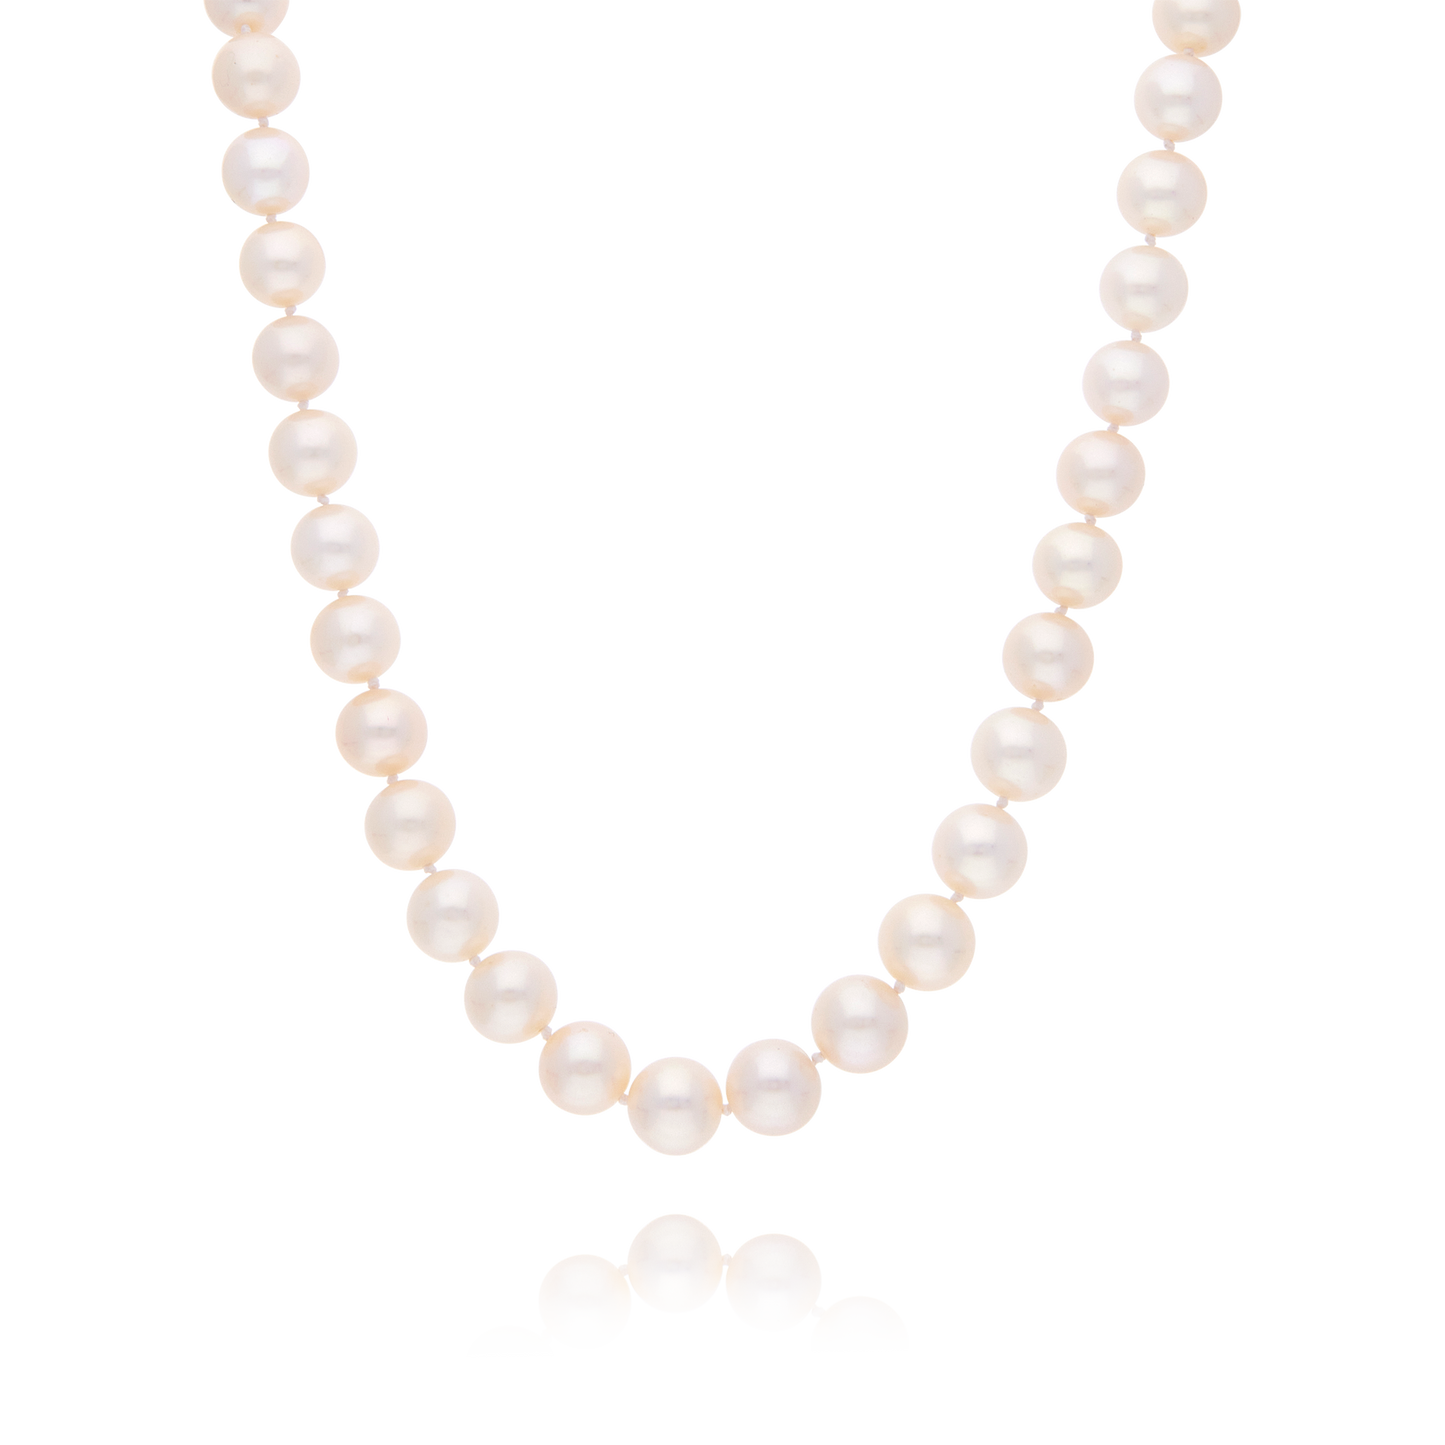 9ct Freshwater Pearl 18-inch Necklace